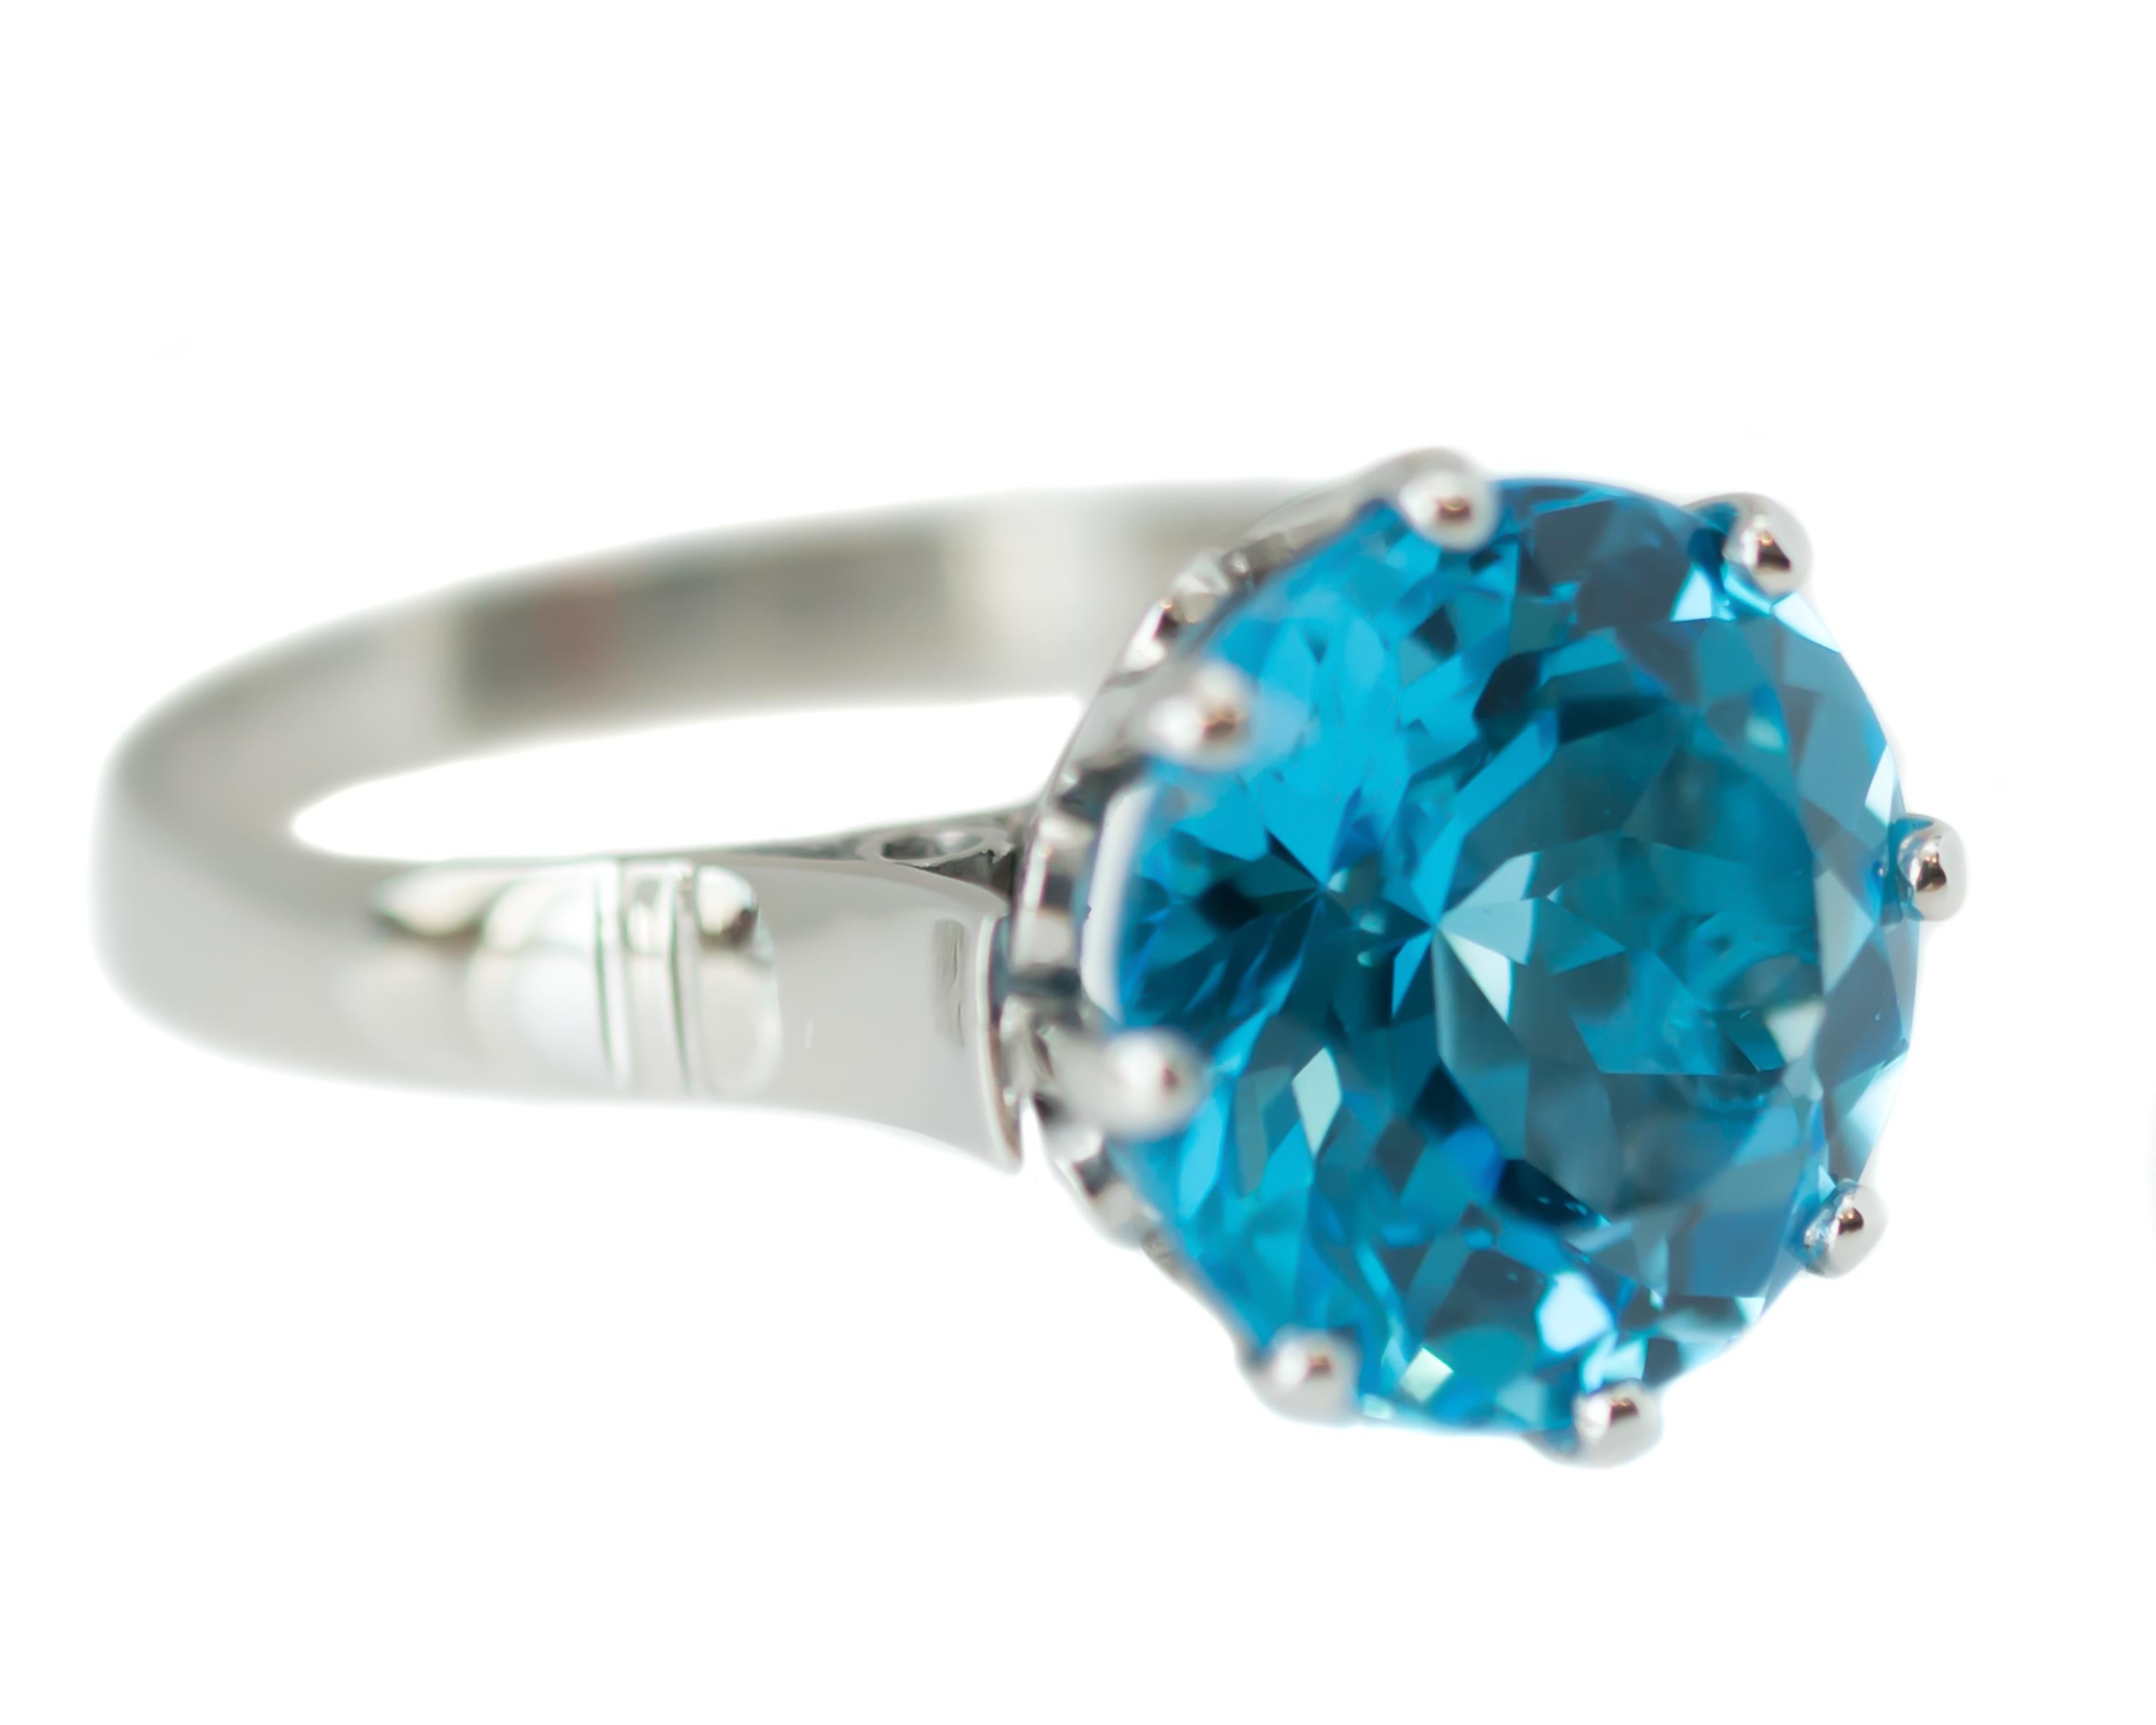 1940s Retro London Blue Topaz Solitaire Ring - Platinum, London Blue Topaz

Features:
8.5 Carat Round London Blue Topaz
Platinum Setting
8-Prong Setting
Decorative Cathedral Setting
Open Gallery and Shoulders

Shank is 3 millimeters wide
Blue Topaz